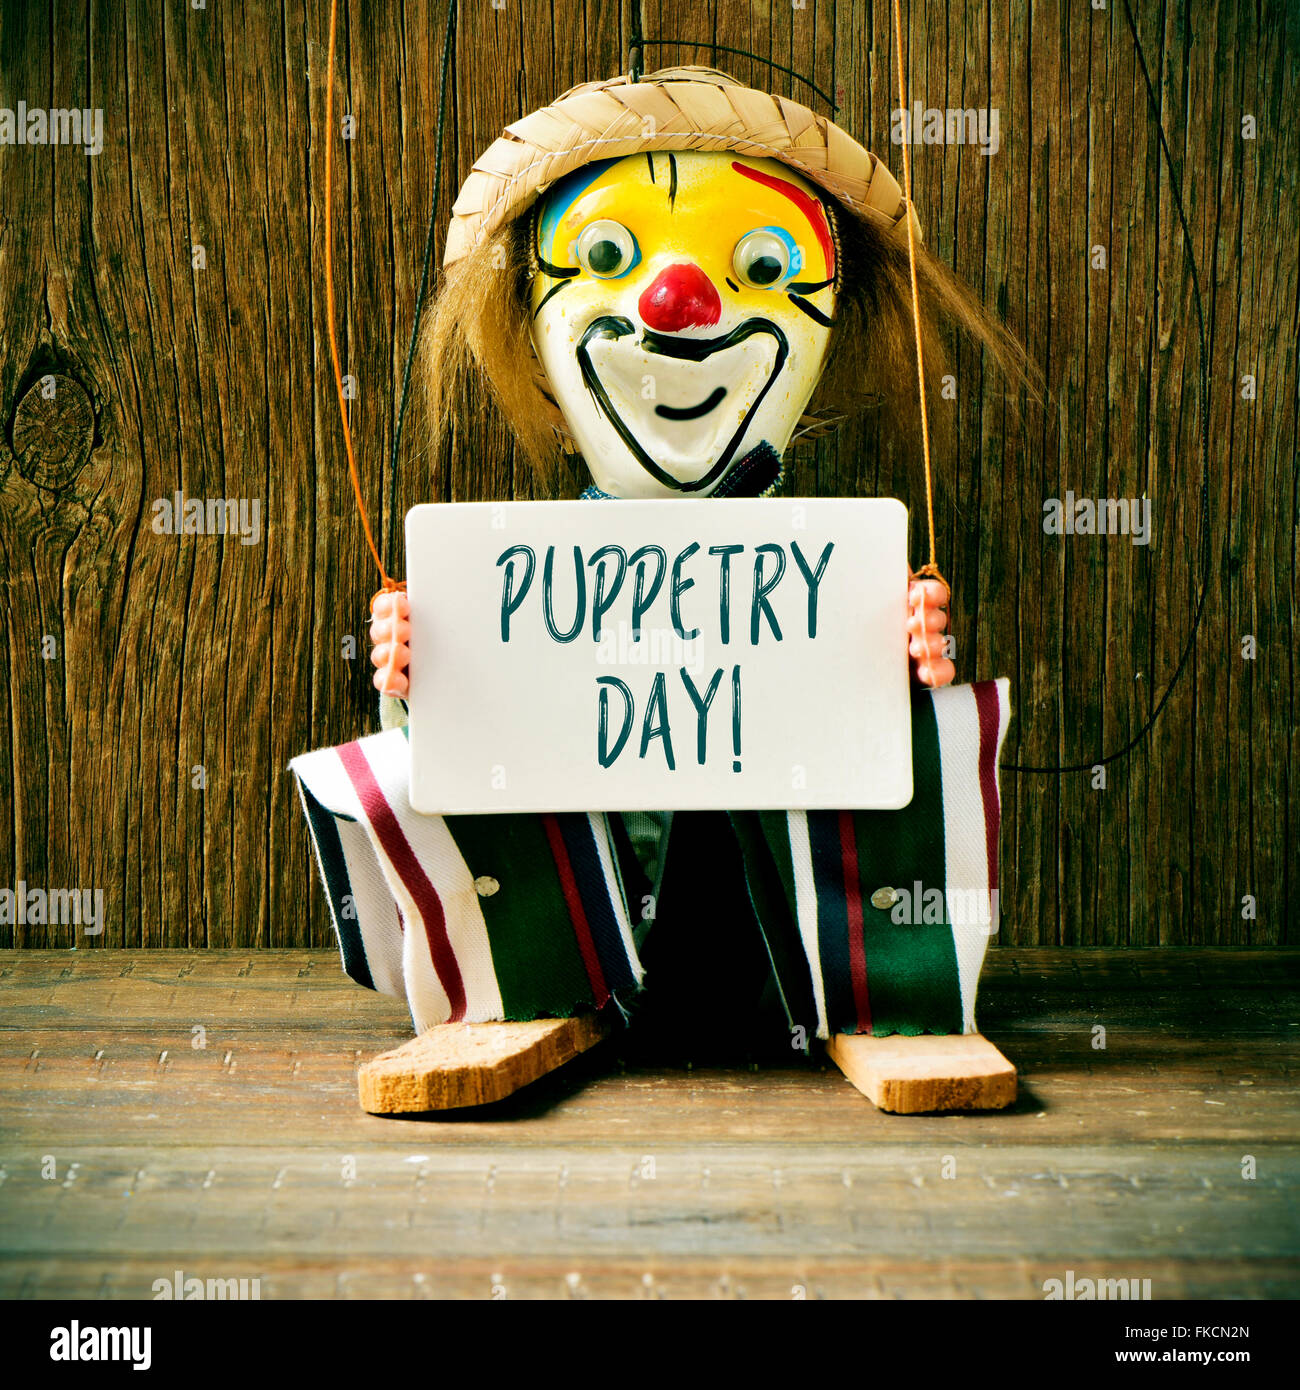 closeup of an old marionette with its face painted as a clown holding a signboard with the text puppetry day Stock Photo